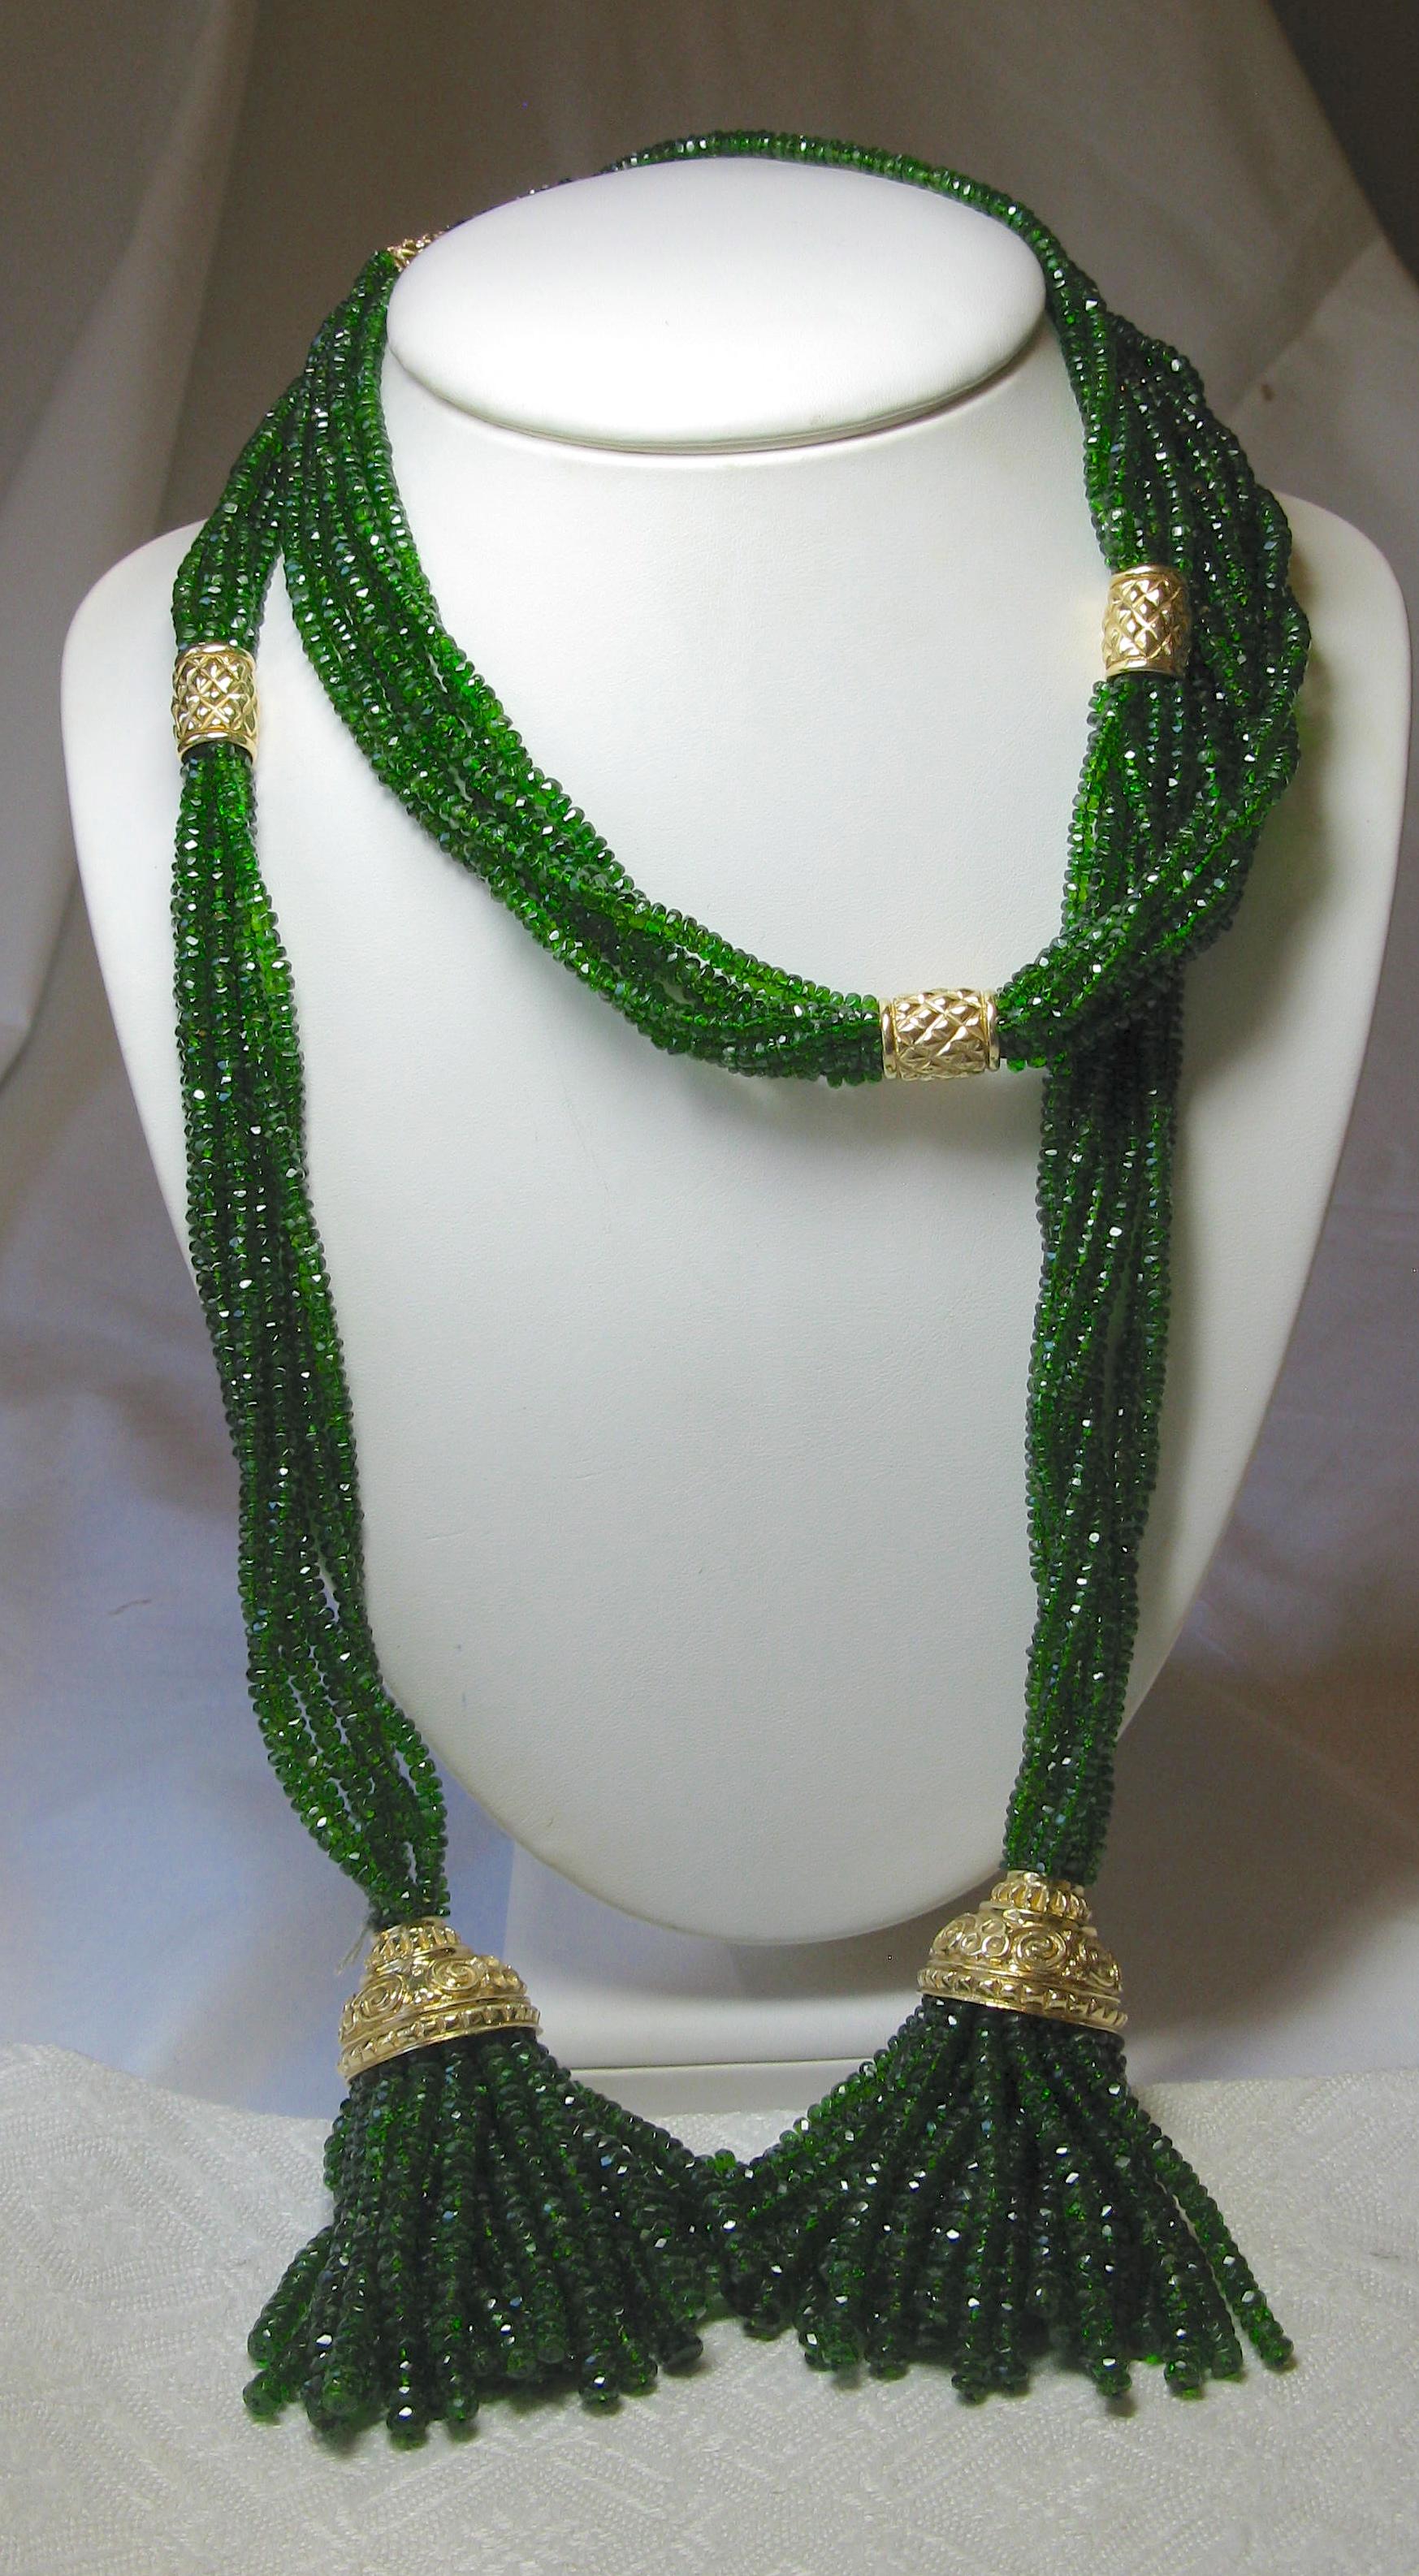 Seven Strands of spectacular Green Sapphires, 44 inches in length, are set with 14 Karat Gold rondelles to create one of the finest Lariat Tassel Necklaces we have seen.  The dramatic length, the stunning vivid green sapphires, and the warm 14 Karat